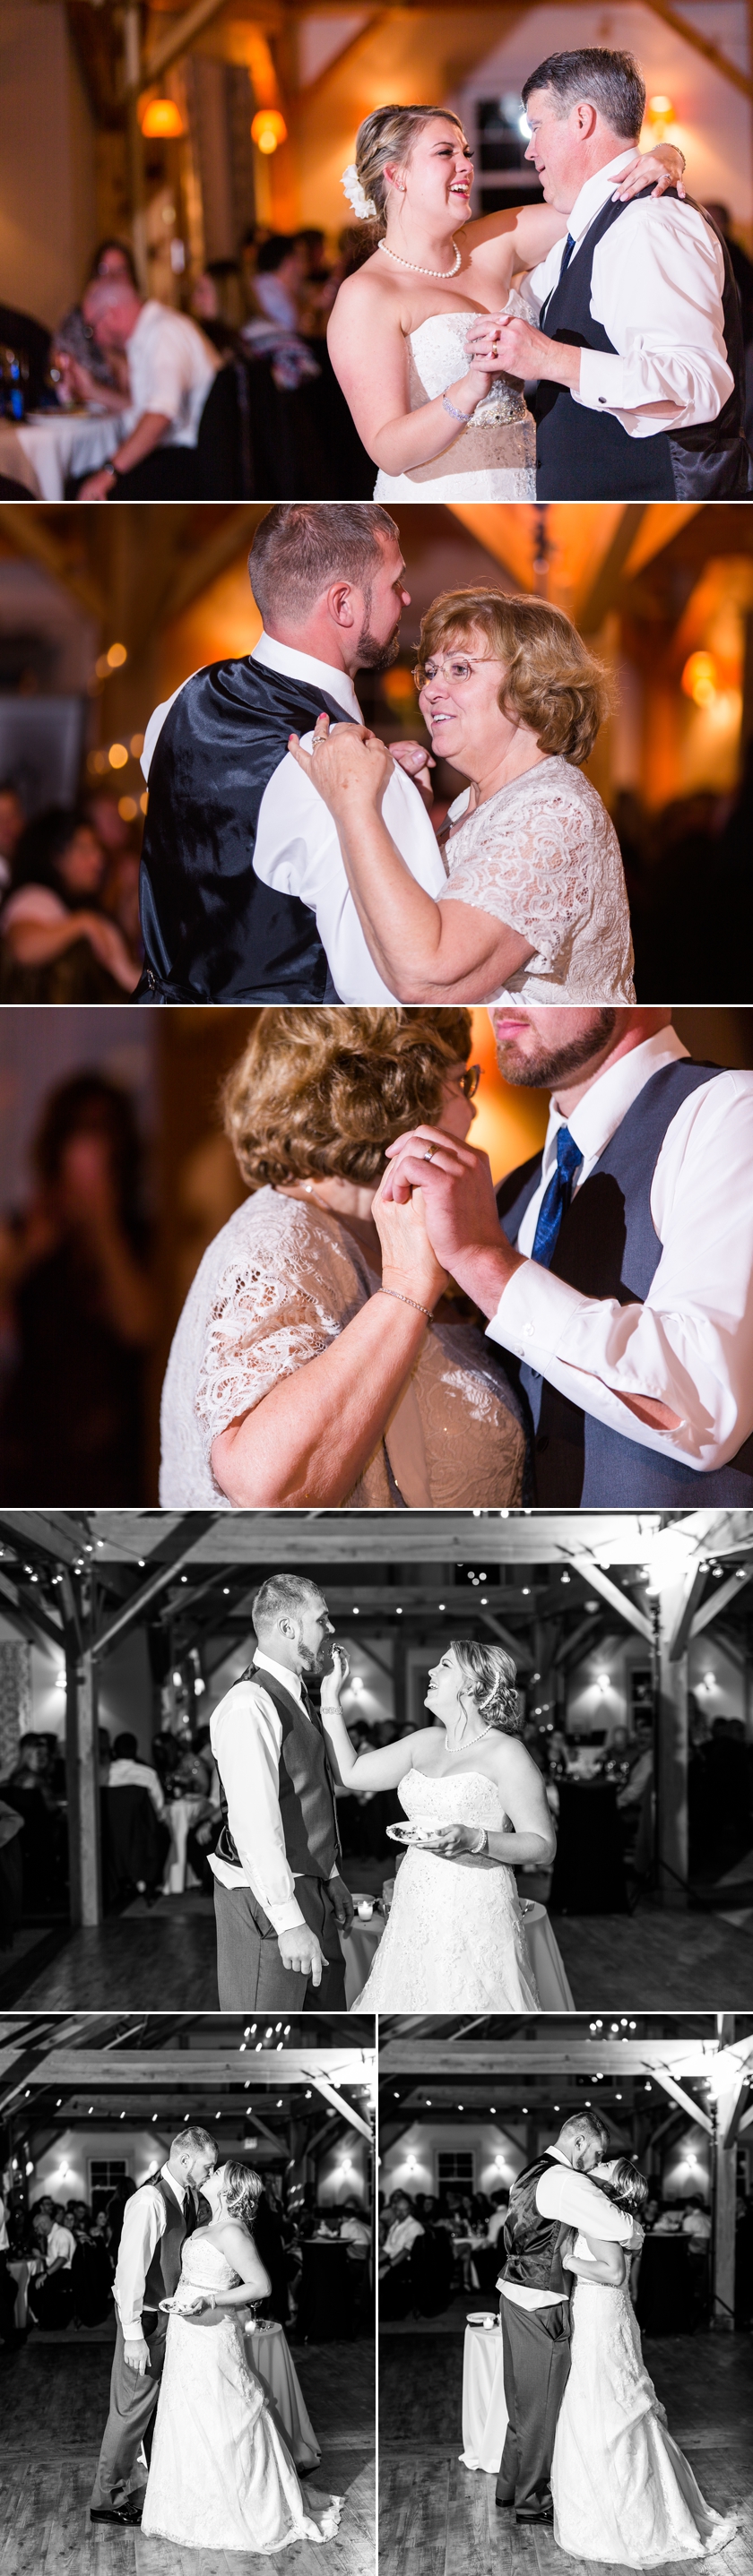 photo collage of parent dances at nichole and george's classic wedding at the wight barn in sturbridge massachusetts